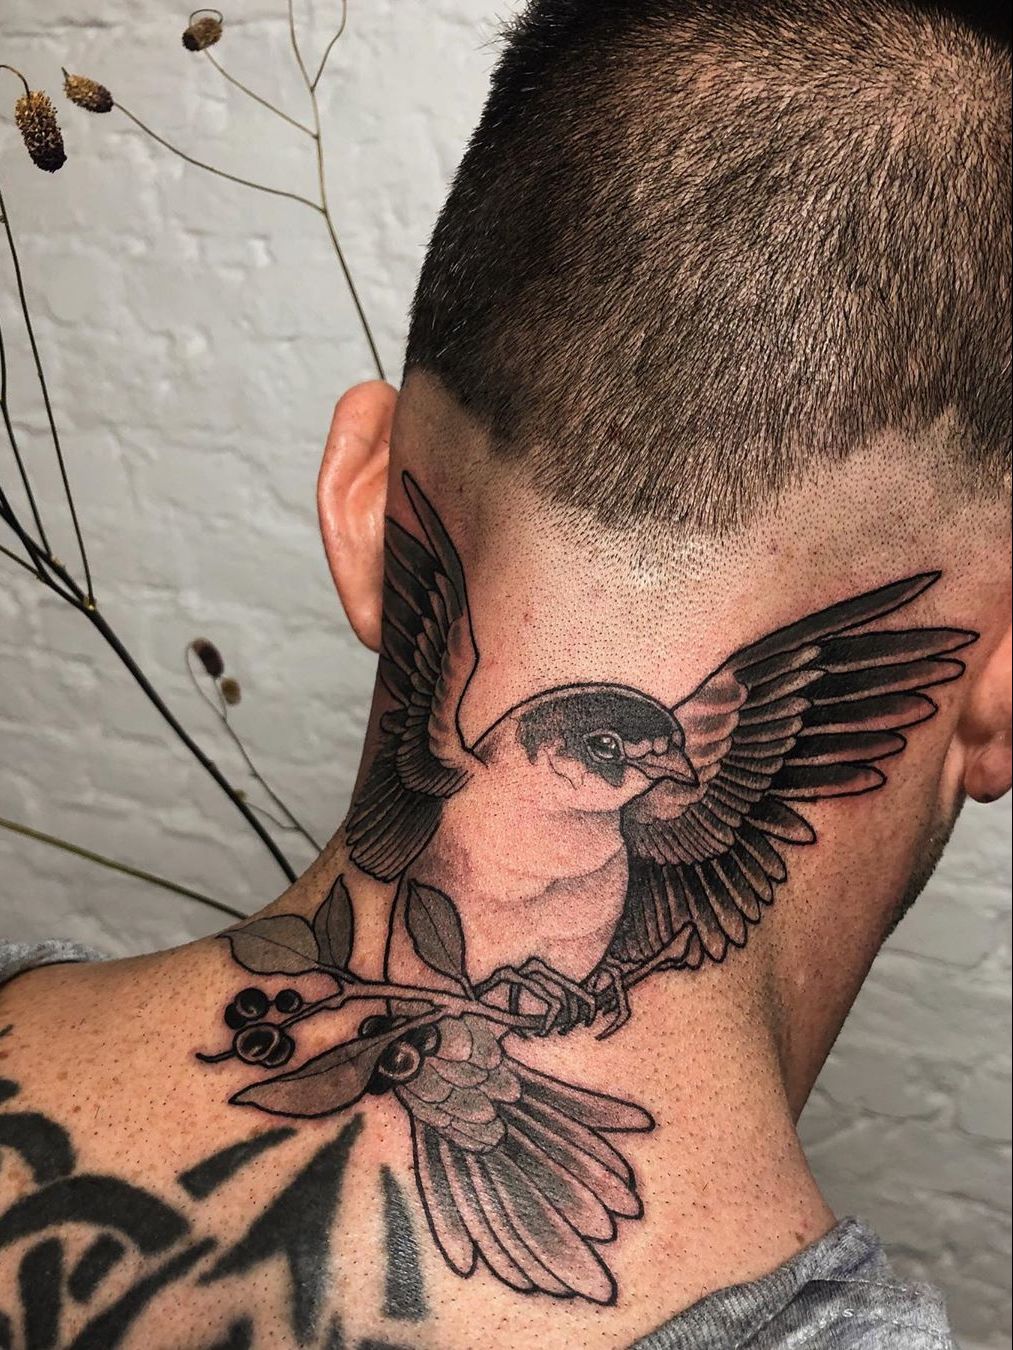 Swallow tattoo on the left side of the neck.